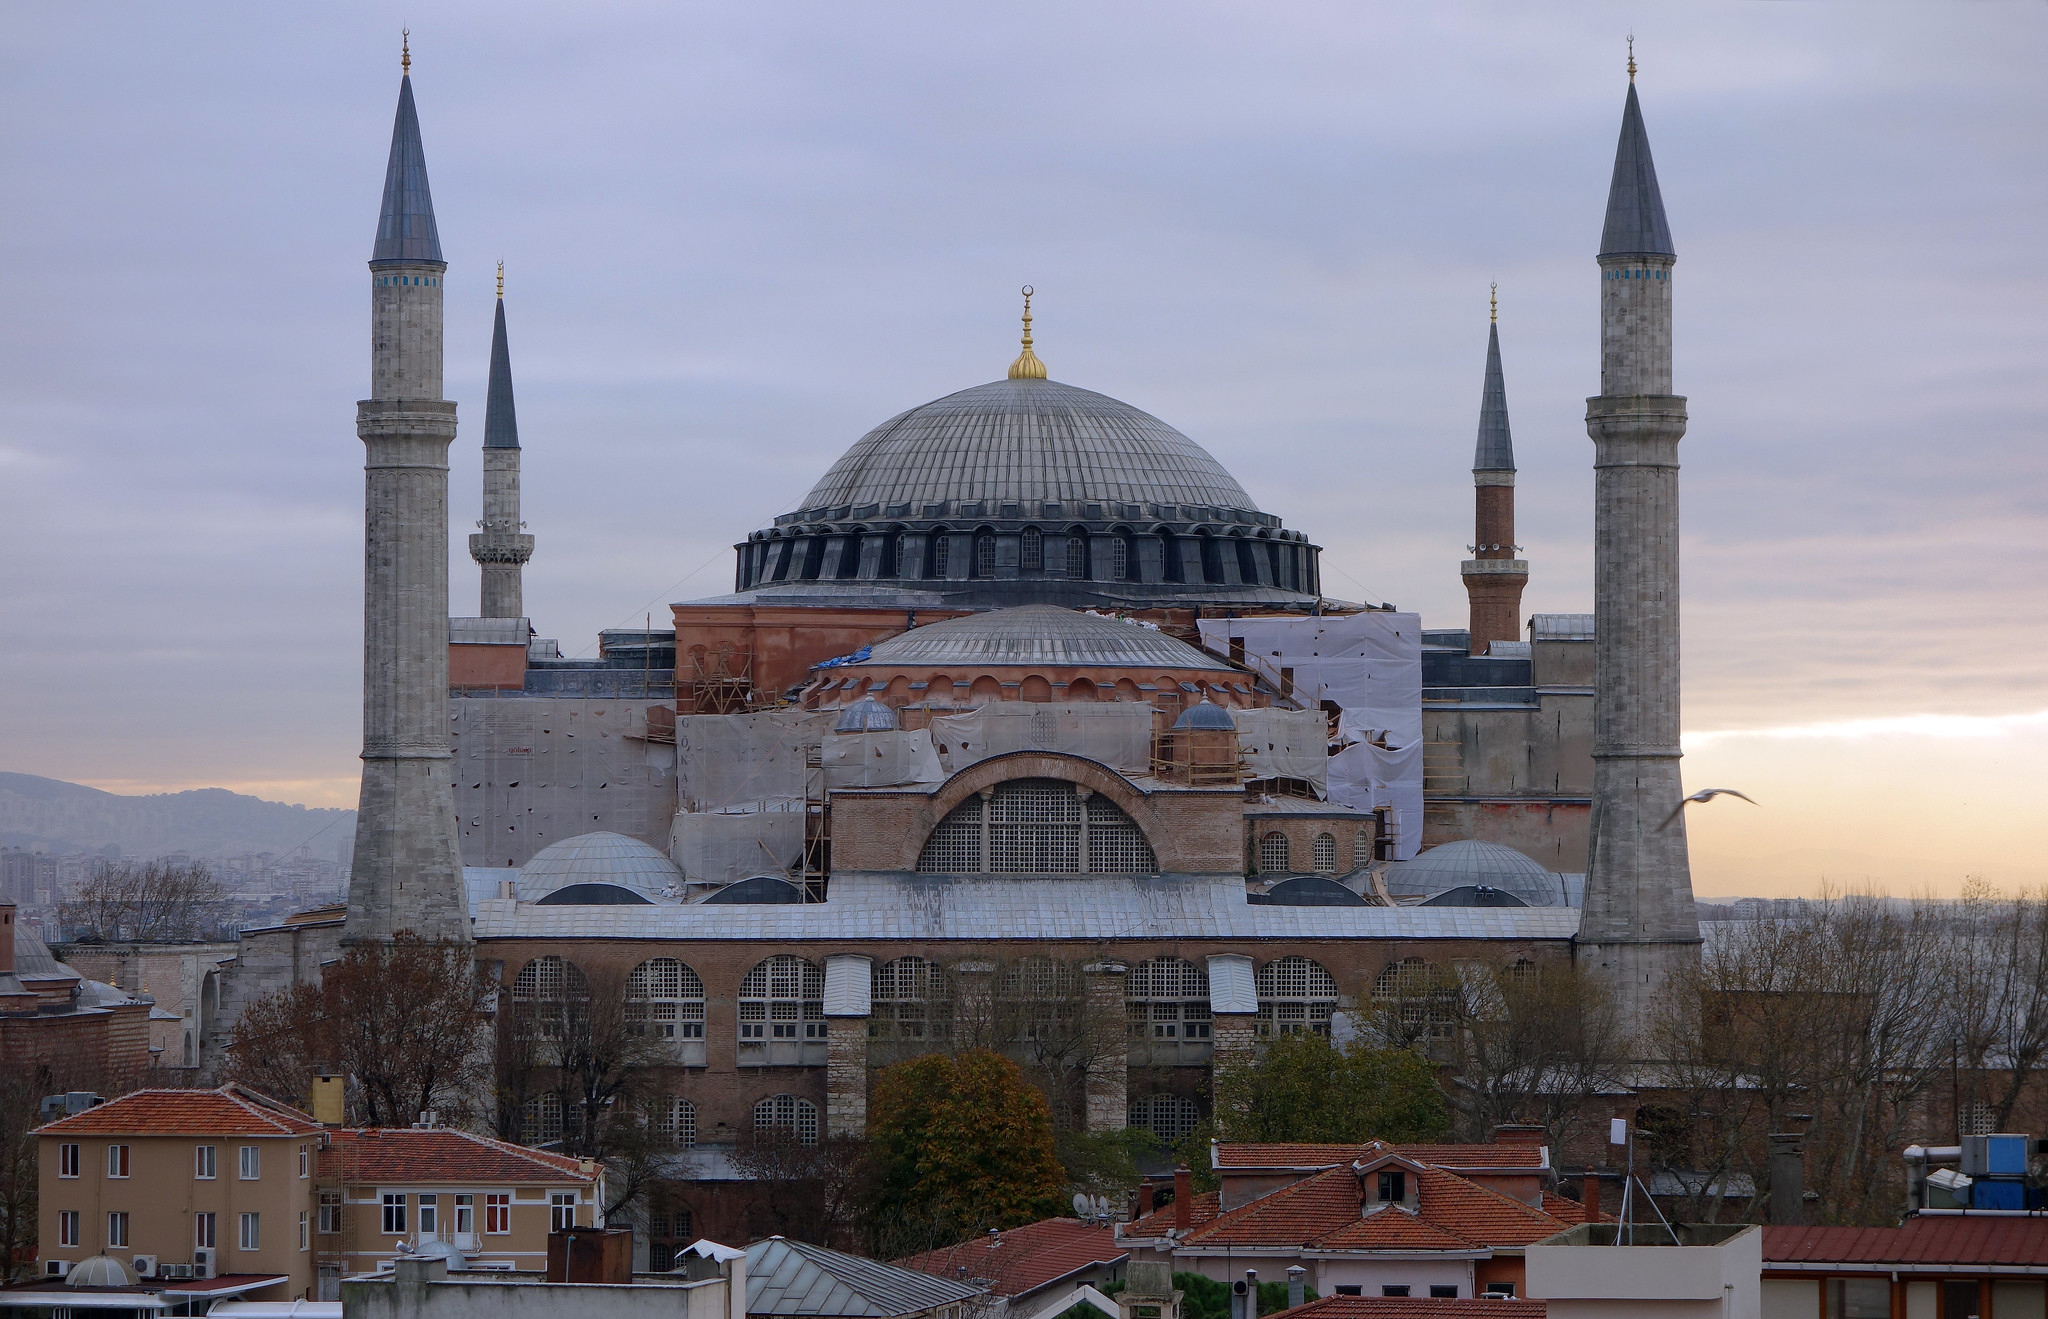 Isidore of Miletus & Anthemius of Tralles for Emperor Justinian, Hagia Sophia, Istanbul, 532–37 (photo: Steven Zucker, CC BY-NC-SA 2.0)